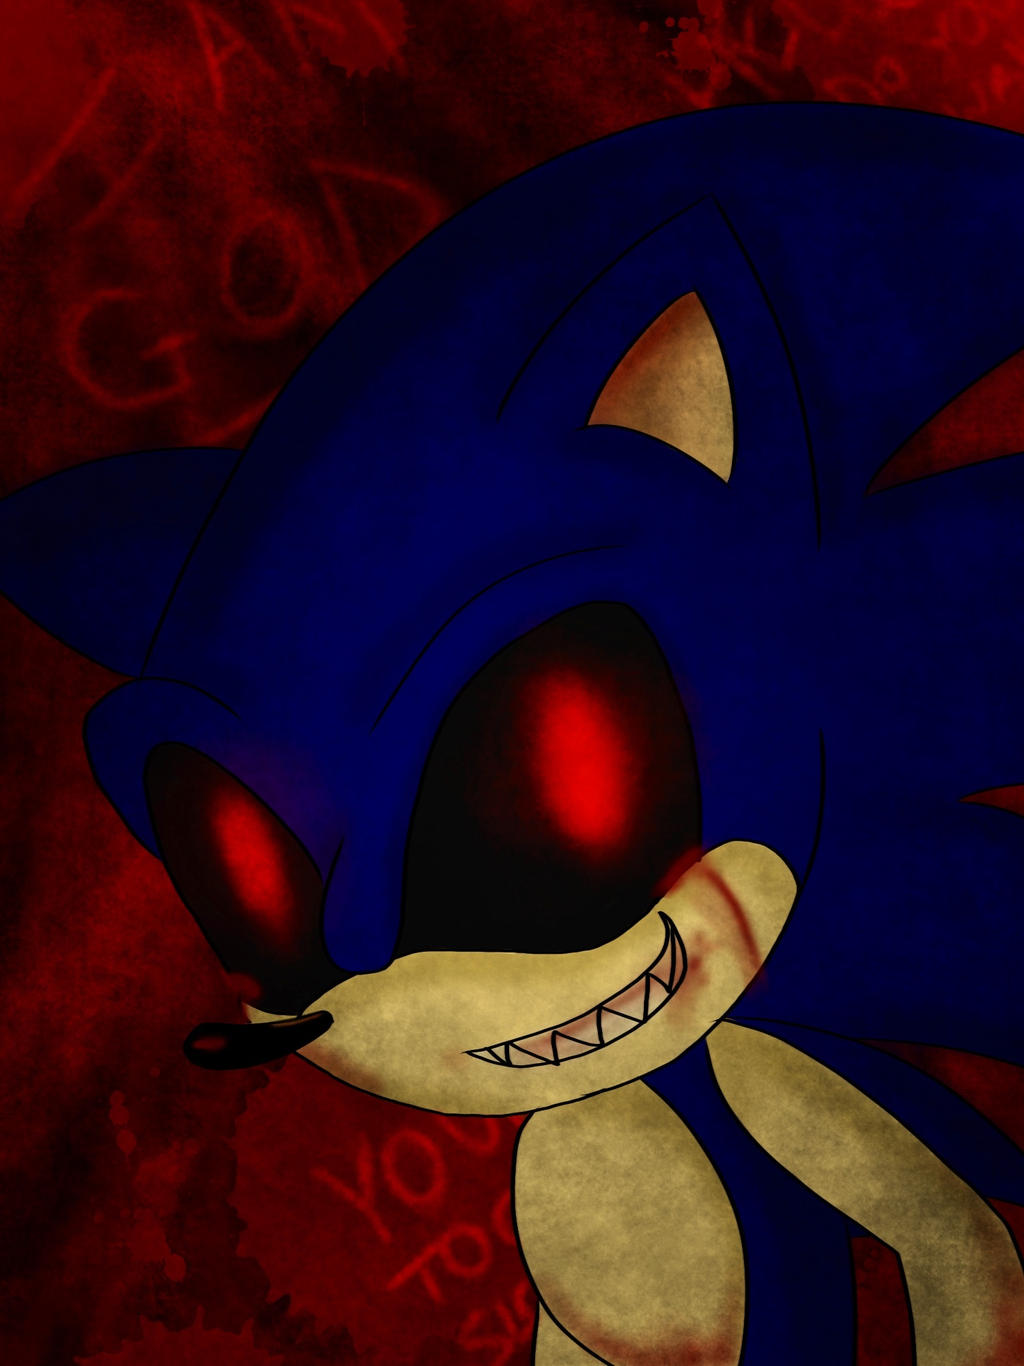 Sonic.EYX, CONTINUED: Sonic.exe Wiki